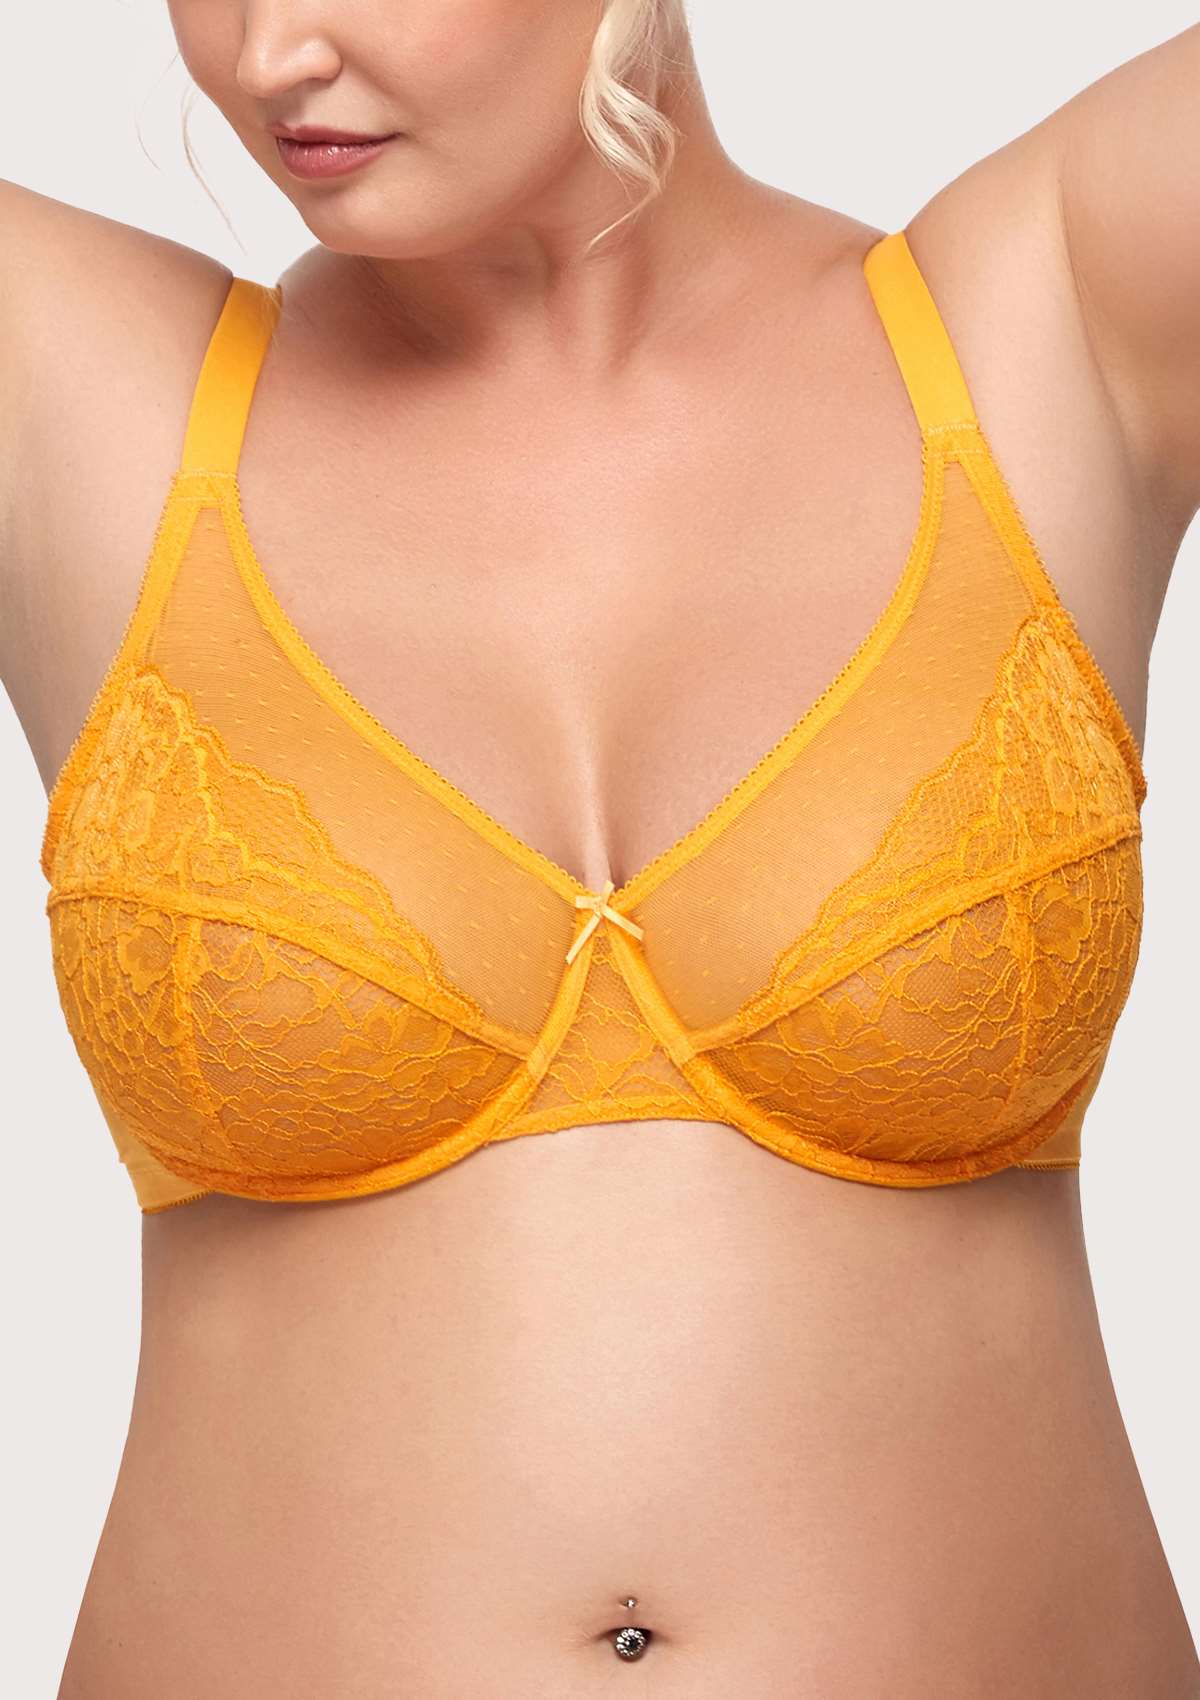 HSIA Enchante Bra And Panty Sets: Unpadded Bra With Back Support - Cadmium Yellow / 36 / DD/E